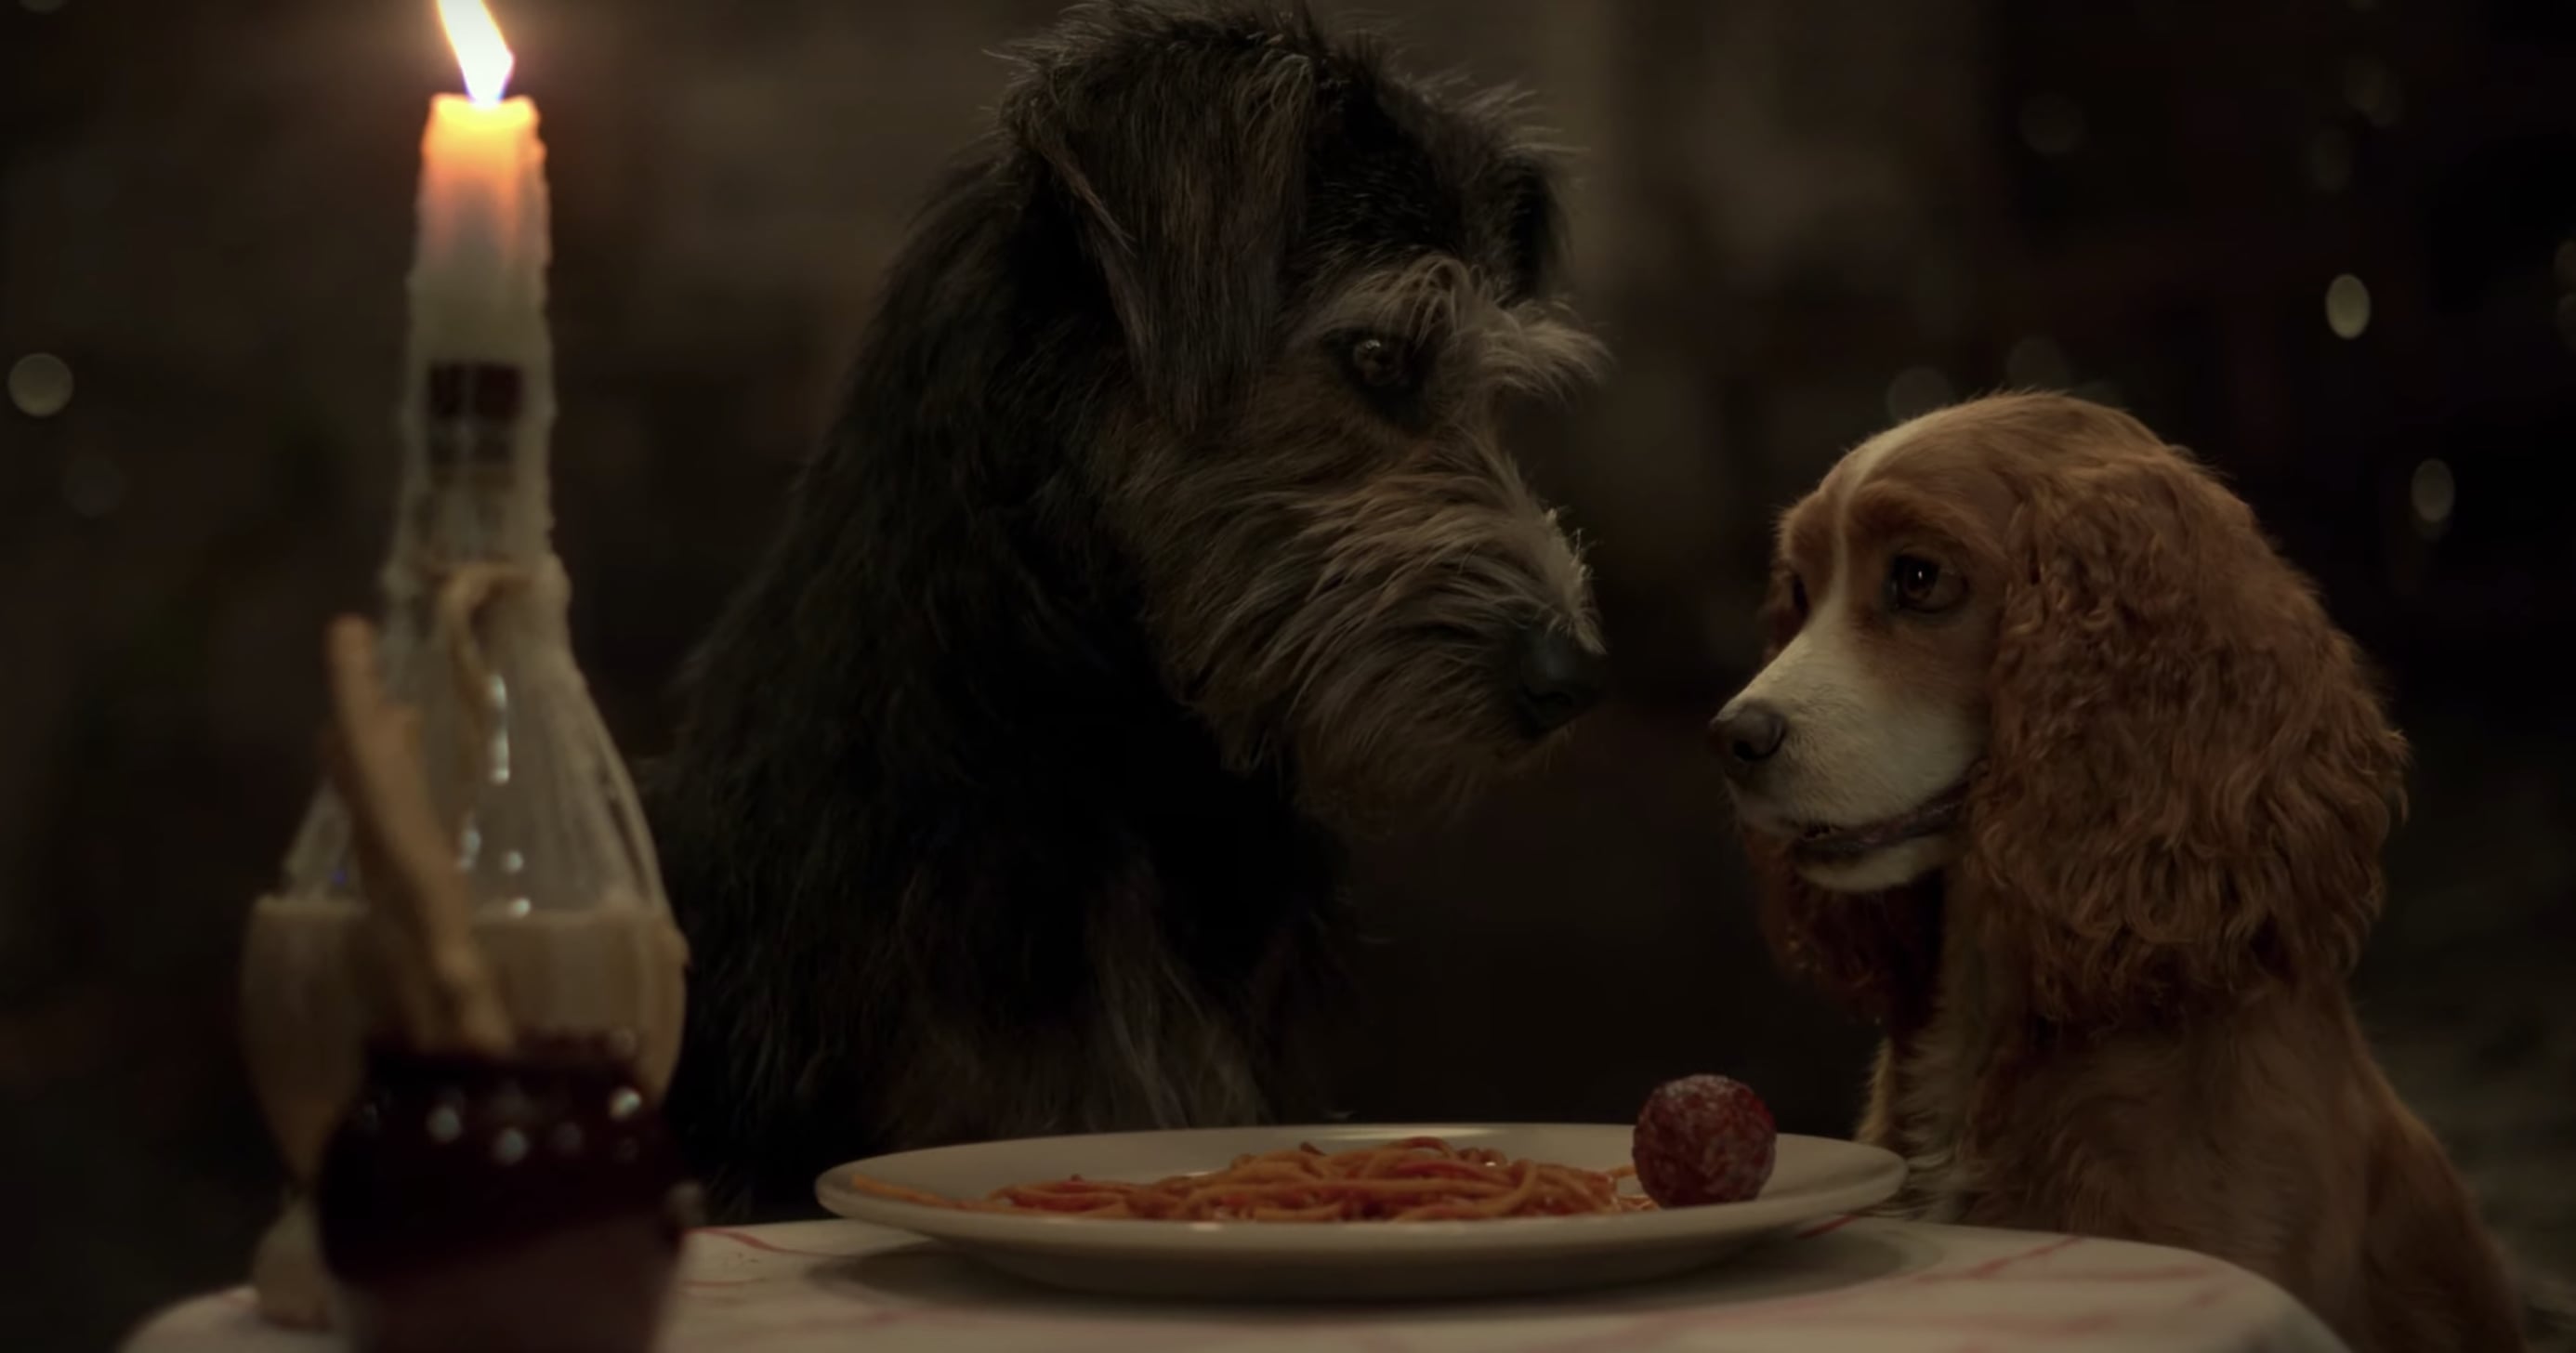 Lady and the Tramp, Official Trailer #2, Disney+